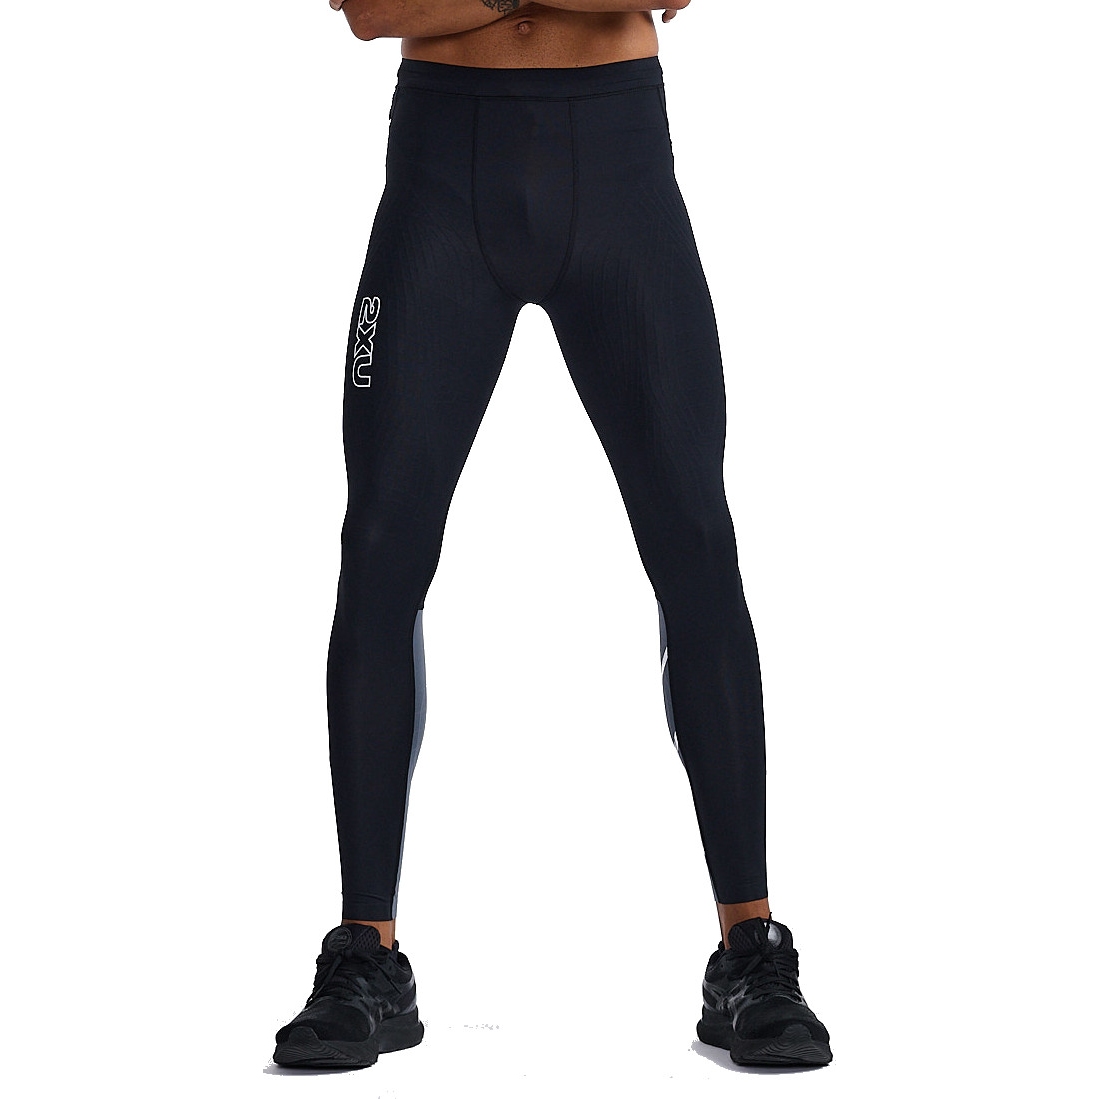 Picture of 2XU Light Speed React Compression Tights Men - black/white reflective 999